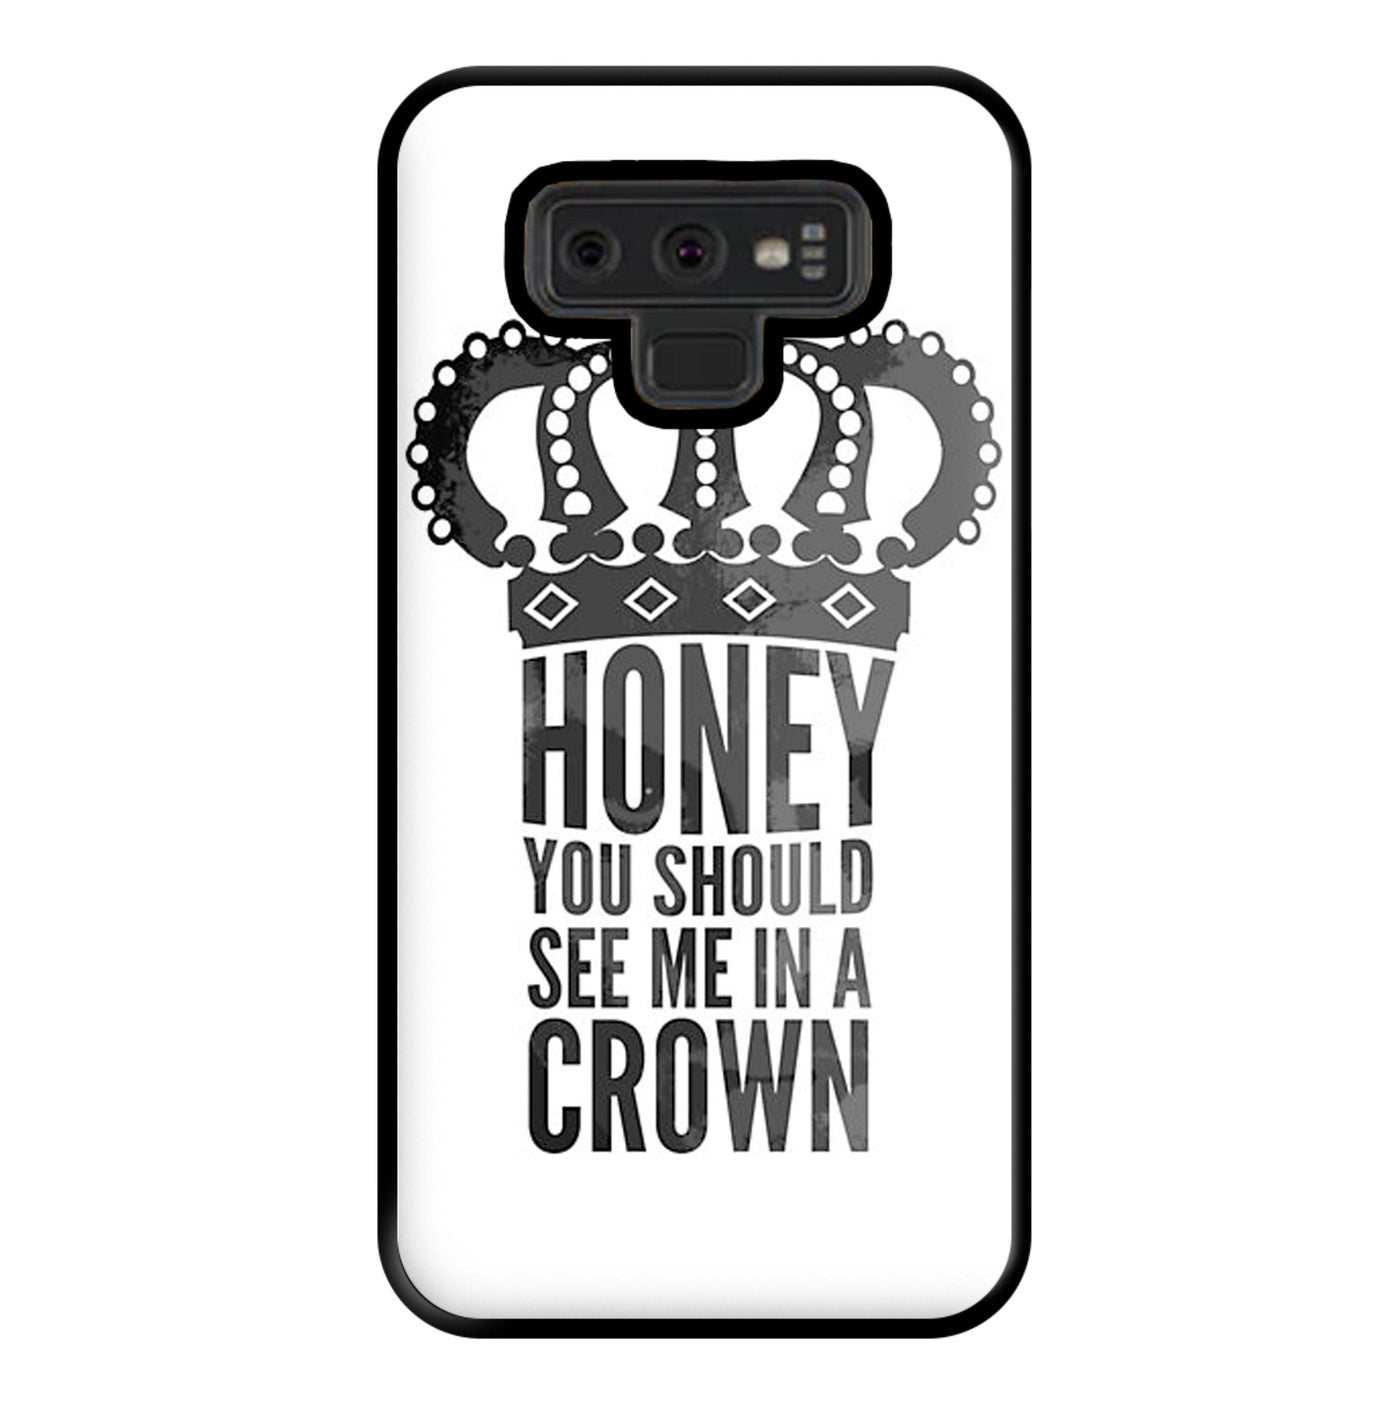 Honey You Should See Me In A Crown - Sherlock Phone Case